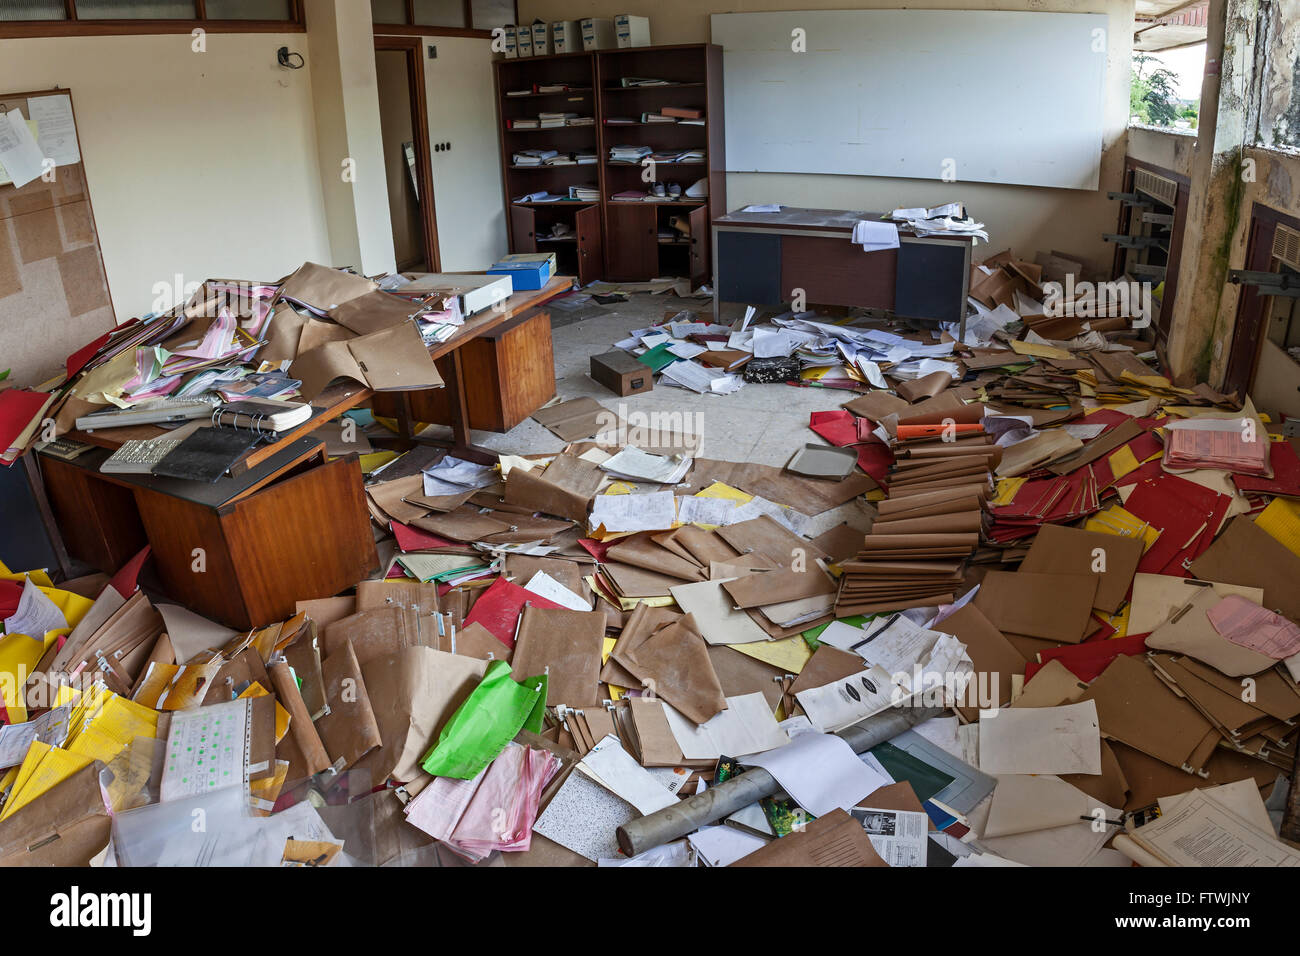 MESSY OFFICE AFTER THE CRISIS Stock Photo